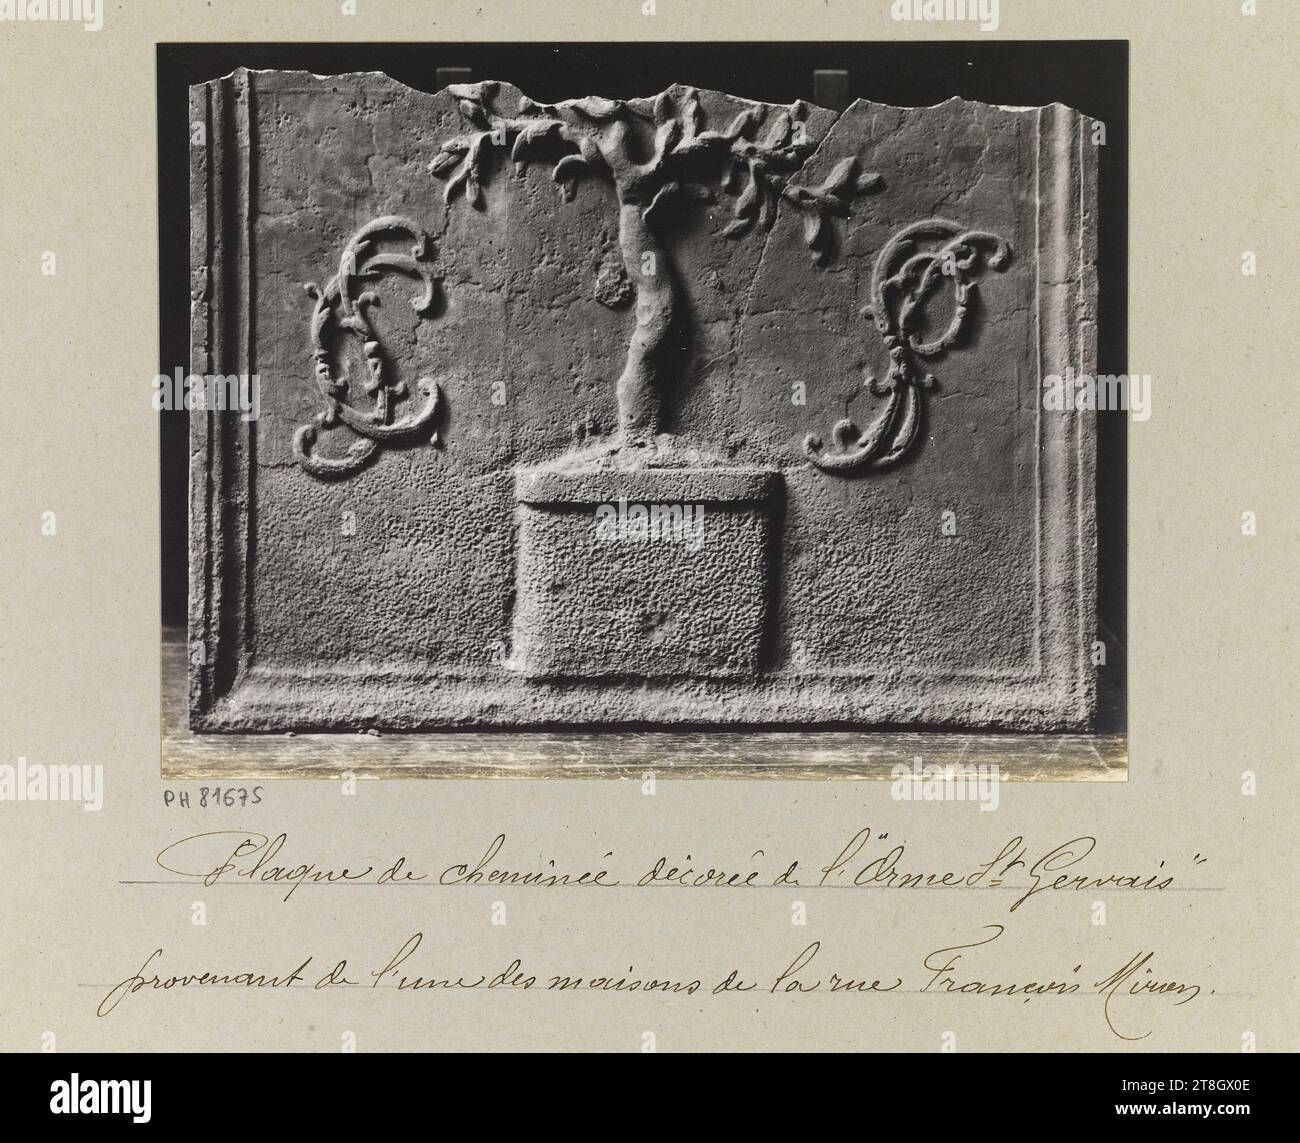 Fireback decorated with 'L'Orme Saint Gervais, from a house in rue François Miron, 4th arrondissement, Paris, Barry, J. (widow), Photographer, In 5-1912, 19th-20th century, Photography, Graphic arts, Photography, Gelatino silver bromide print, Dimensions - Work: Height: 10.2 cm, Width: 13.3 cm, Dimensions - Mounting:, Height: 50.4 cm, Width: 40 cm Stock Photo